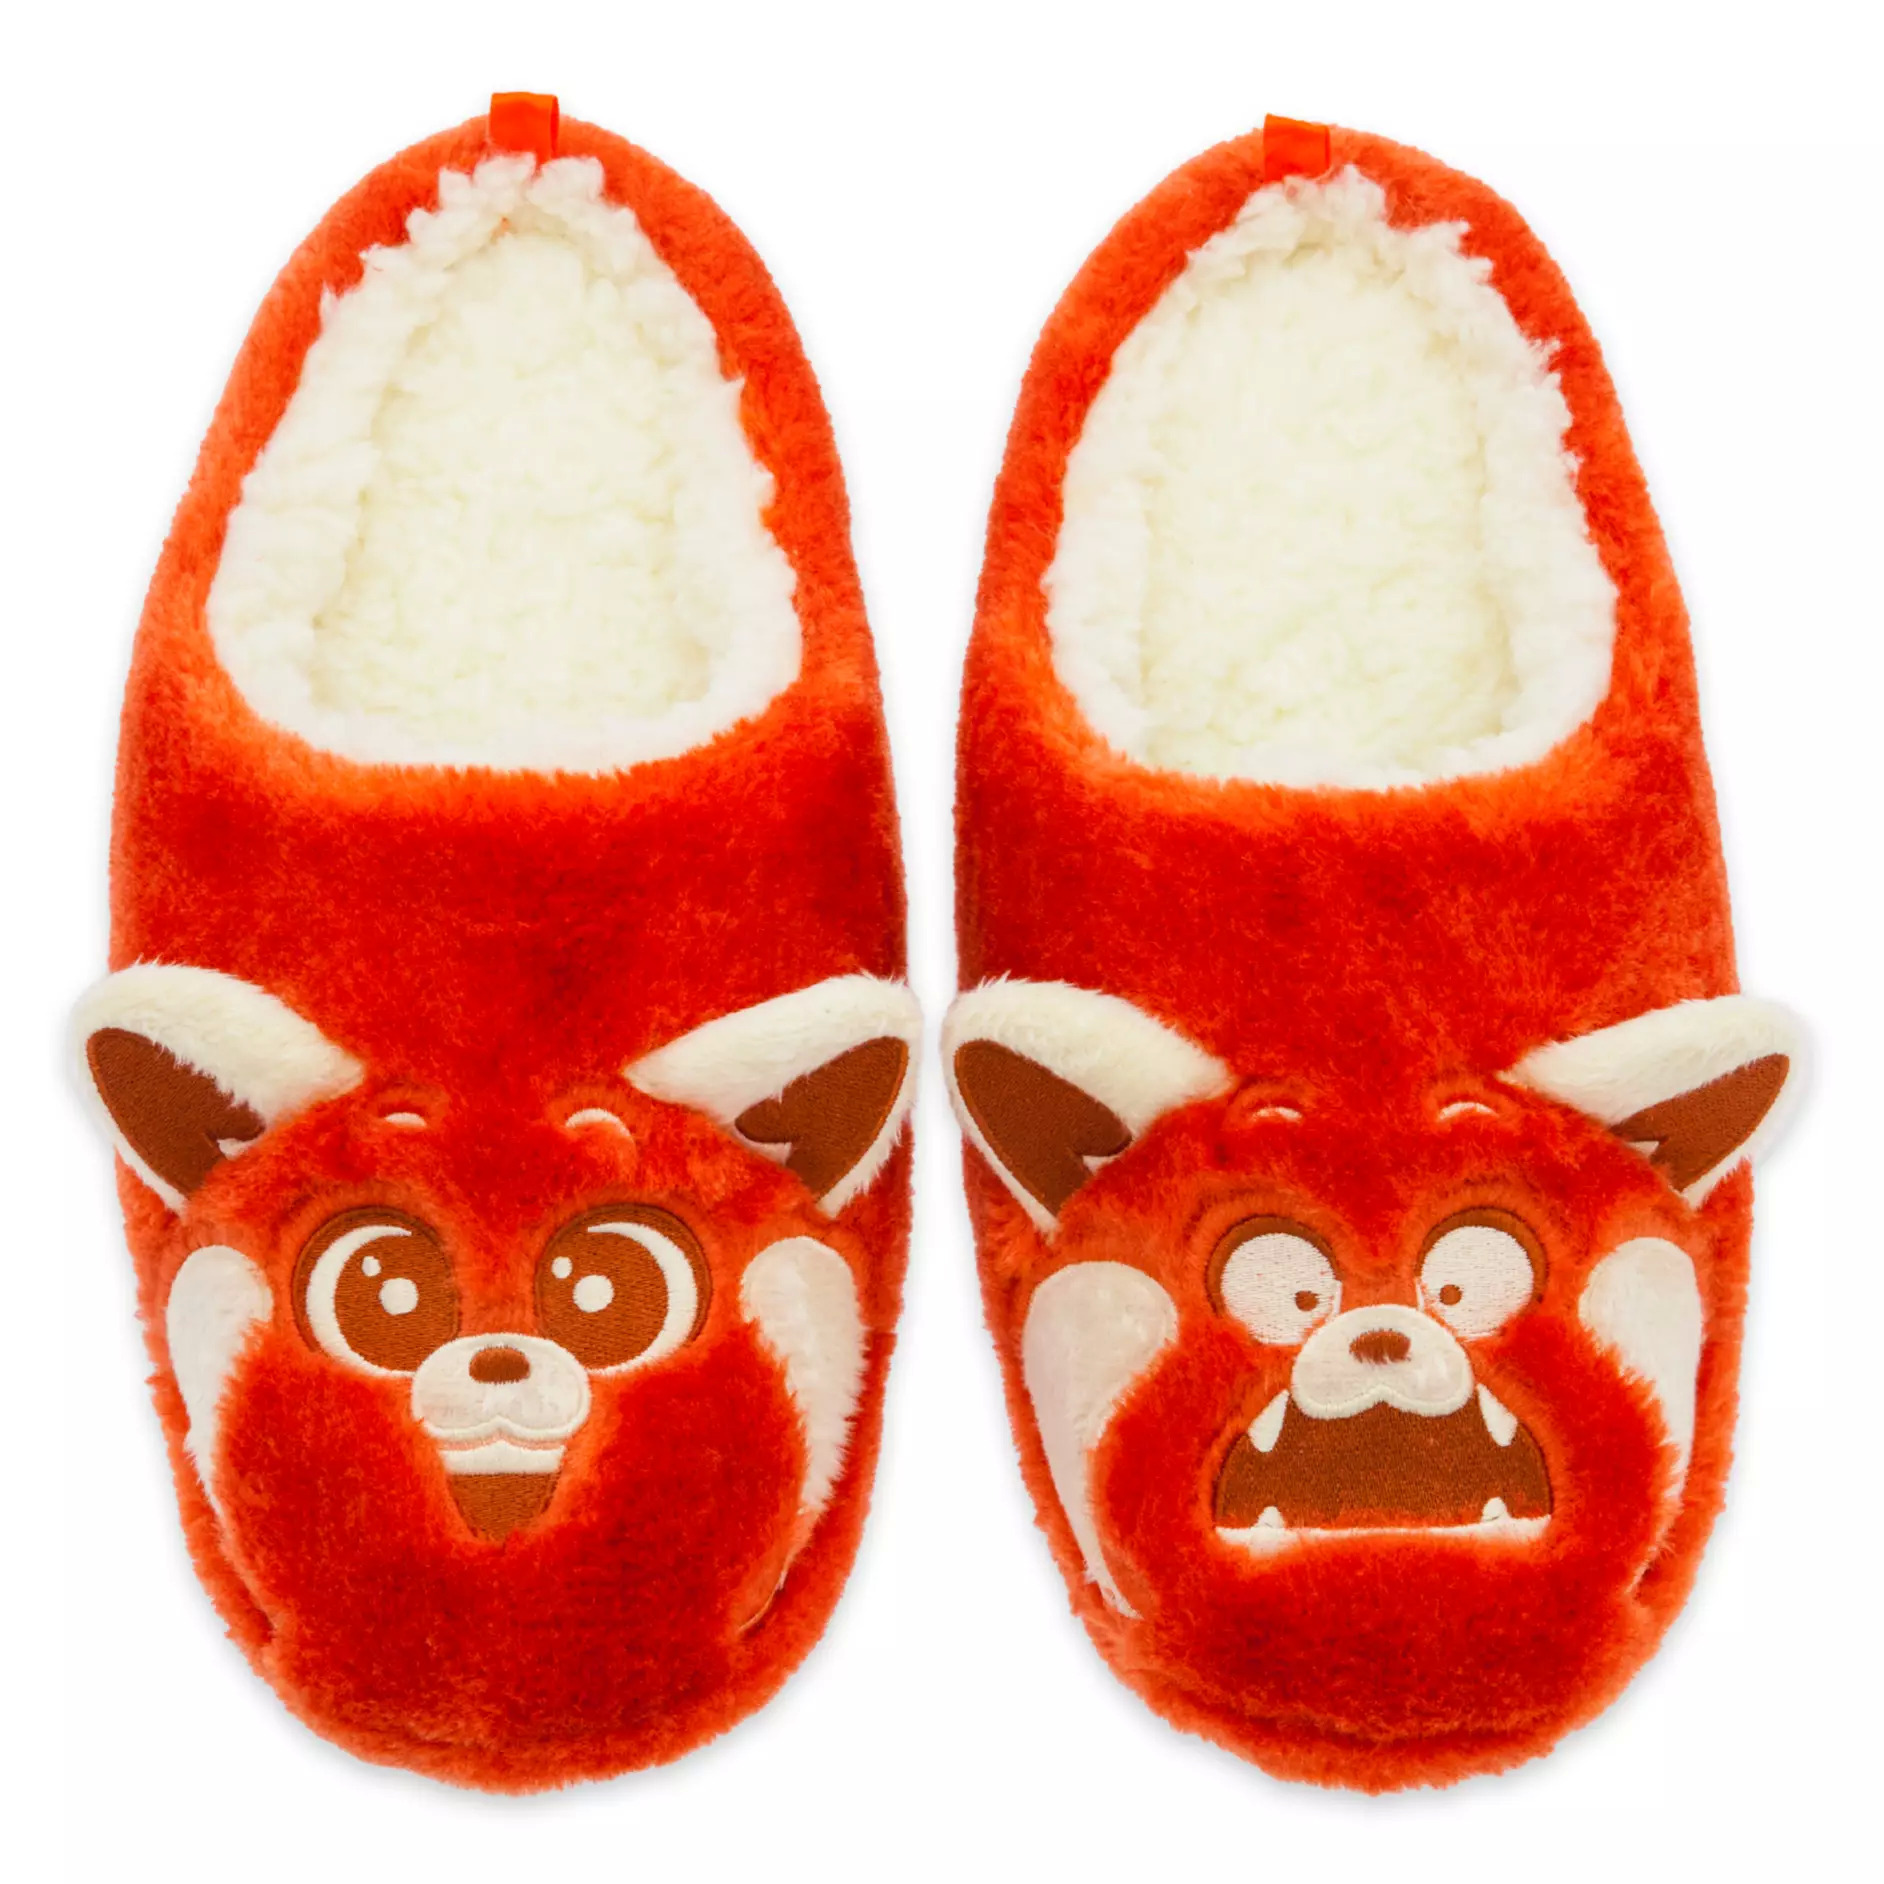 shopDisney: Extra 30% Off Adult Clothing, Accessories, & More, Mei Panda Plush Slippers for Adults $13.99 + Free Shipping on $75+